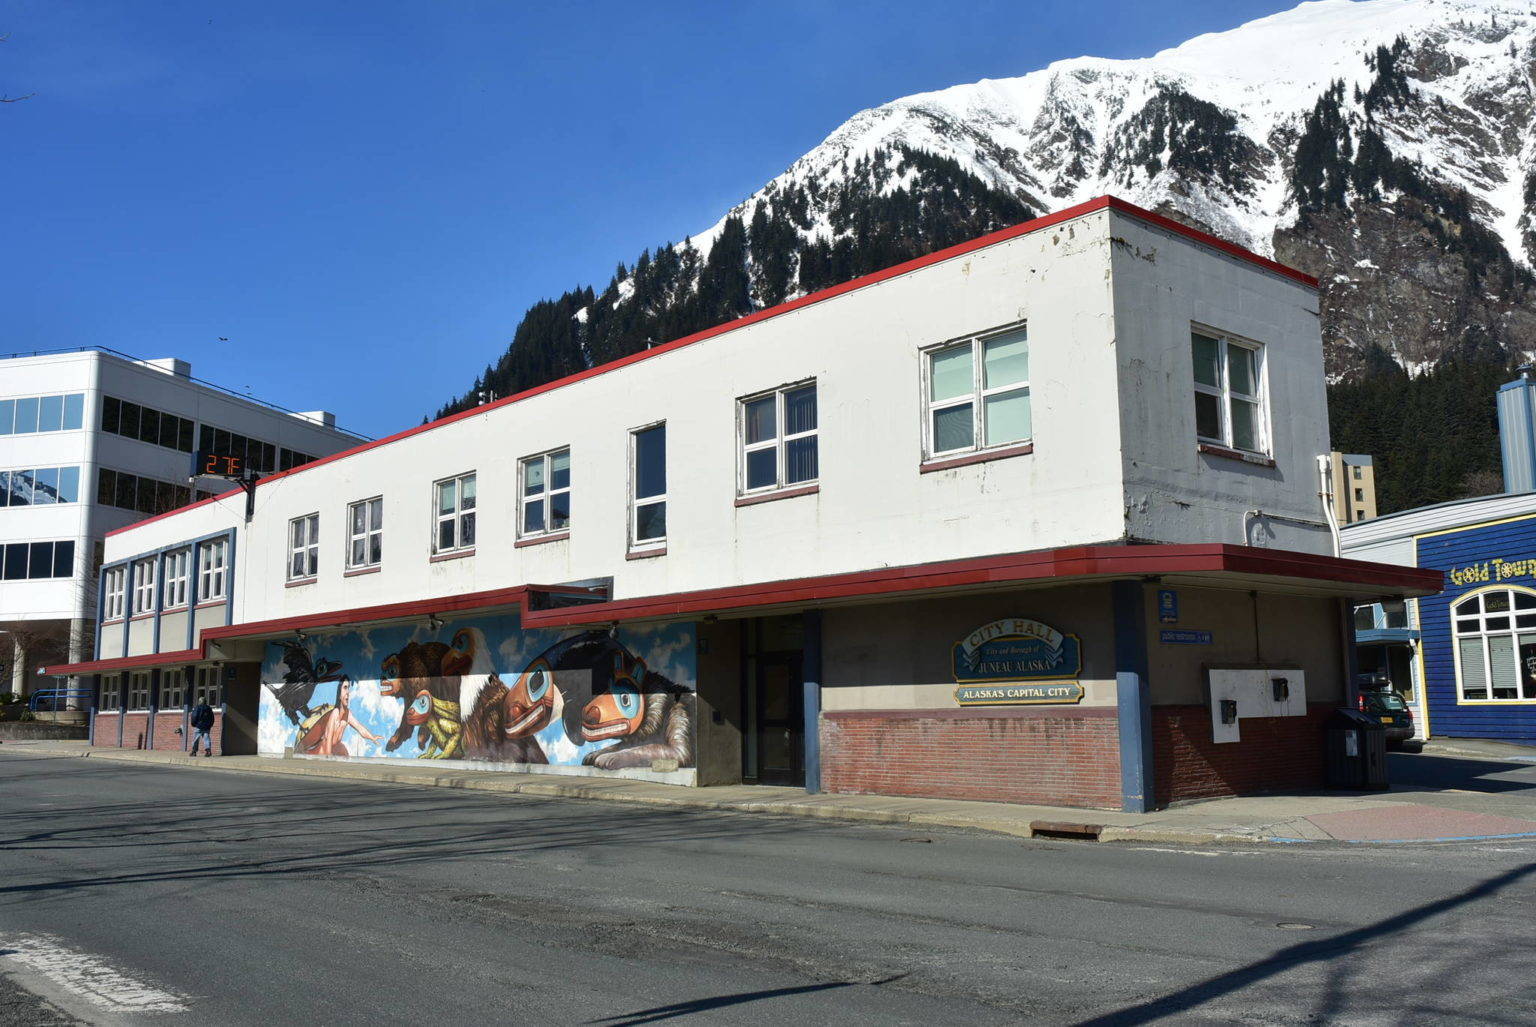 Juneau City Hall on Monday, March 30. The City and Borough of Juneau voted Monday against raising taxes and passed a reduced budget. They also looked at creating a jobs program to do trail maintenance. (Peter Segall | Juneau Empire file)